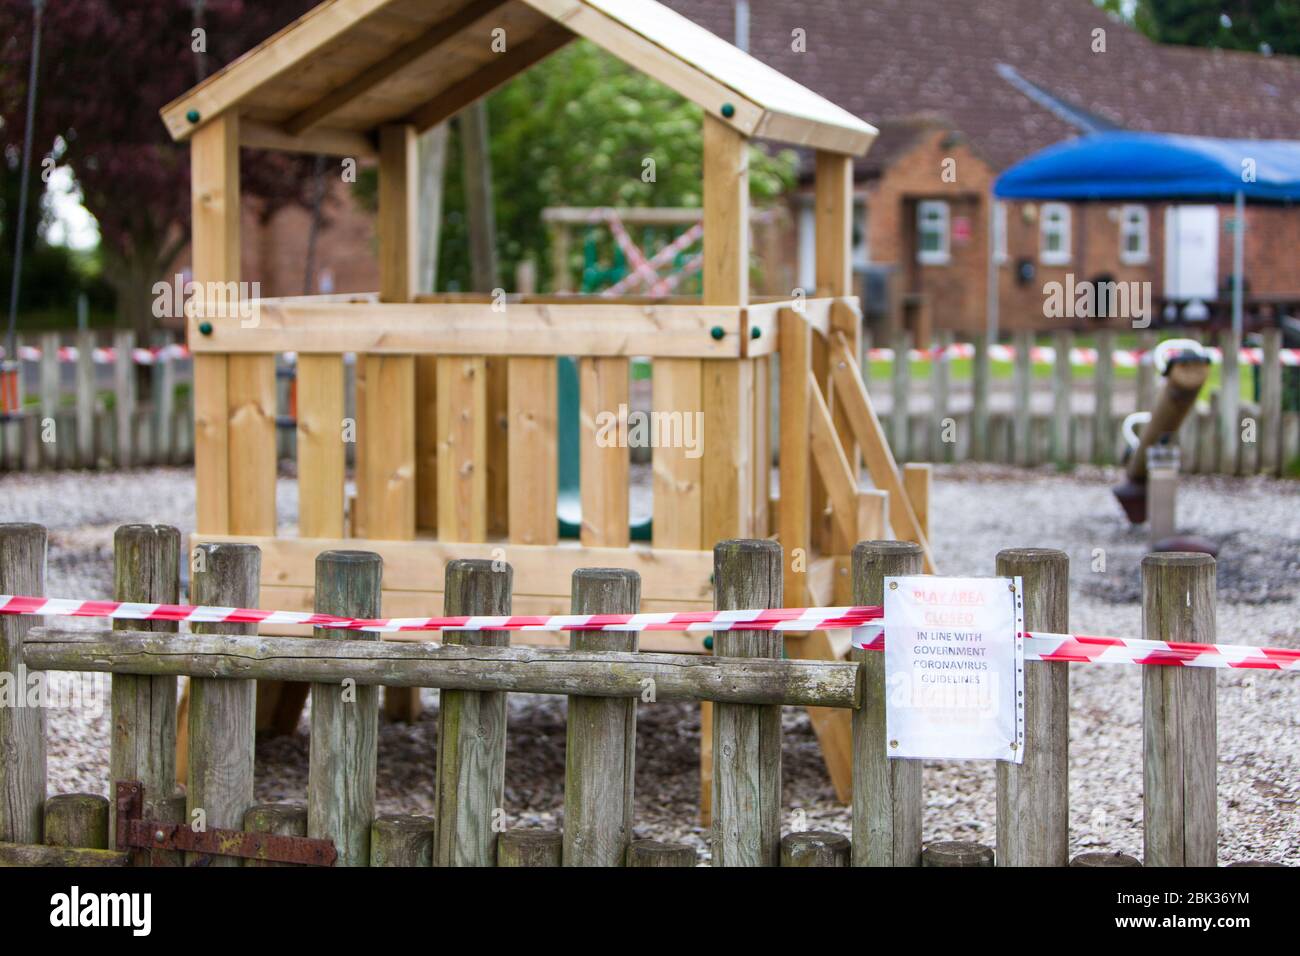 Childrens playground closed due to Covid 19, childrens playground closed due to coronavirus, playground closed, play area closed covid 19, closed, Stock Photo